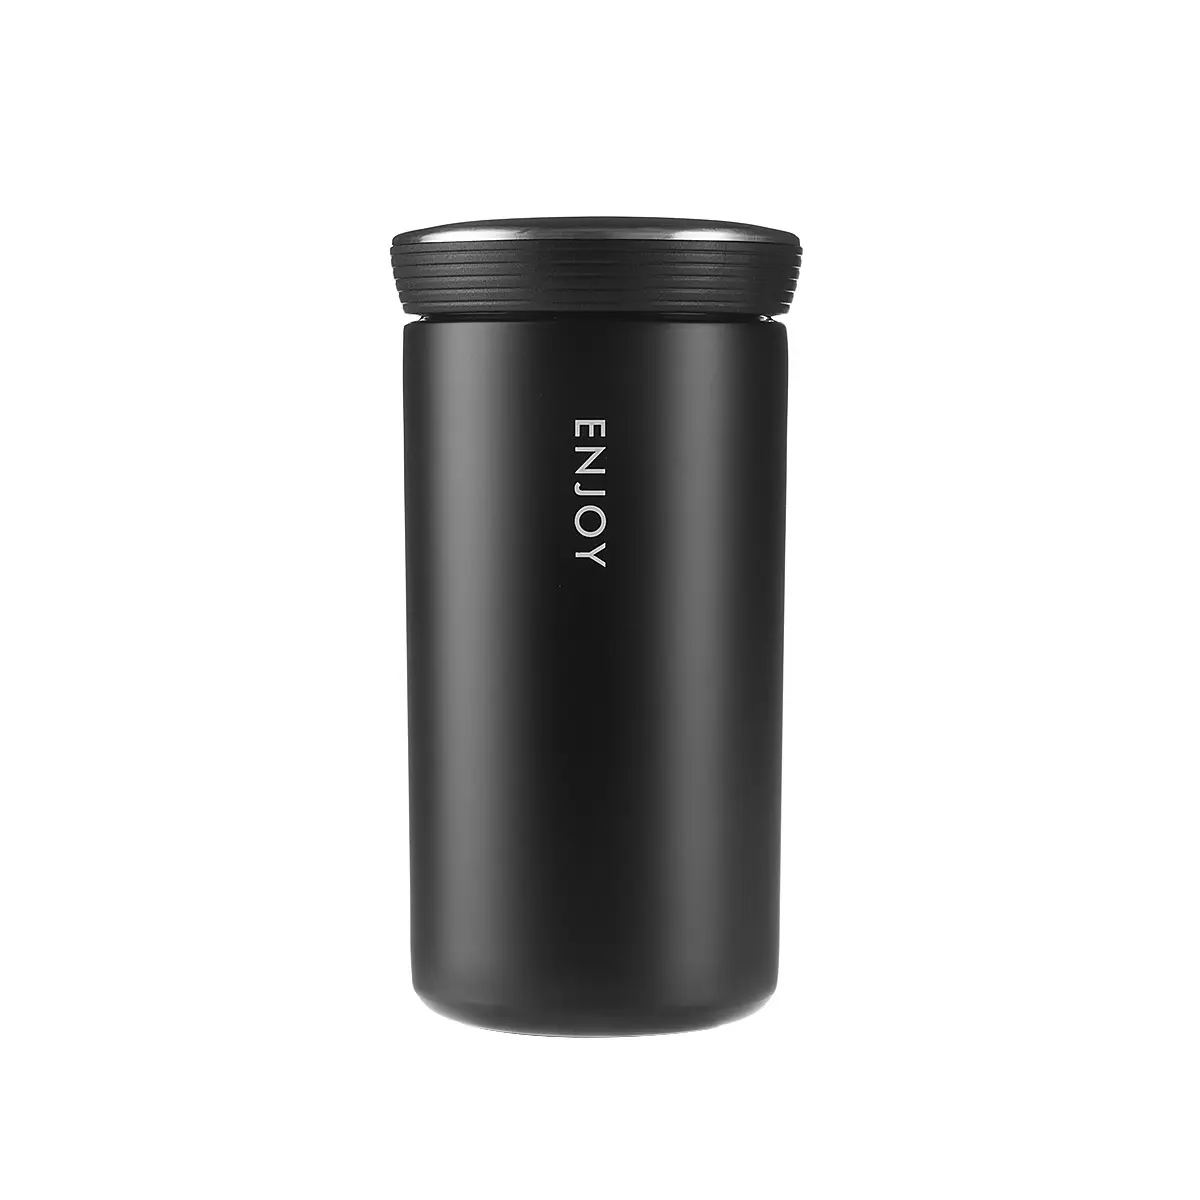 New 350ml Thermos Mug With Filter Business Style Double Wall Stainless Steel Vacuum Flasks Coffee Tea Travel Mug Thermocup